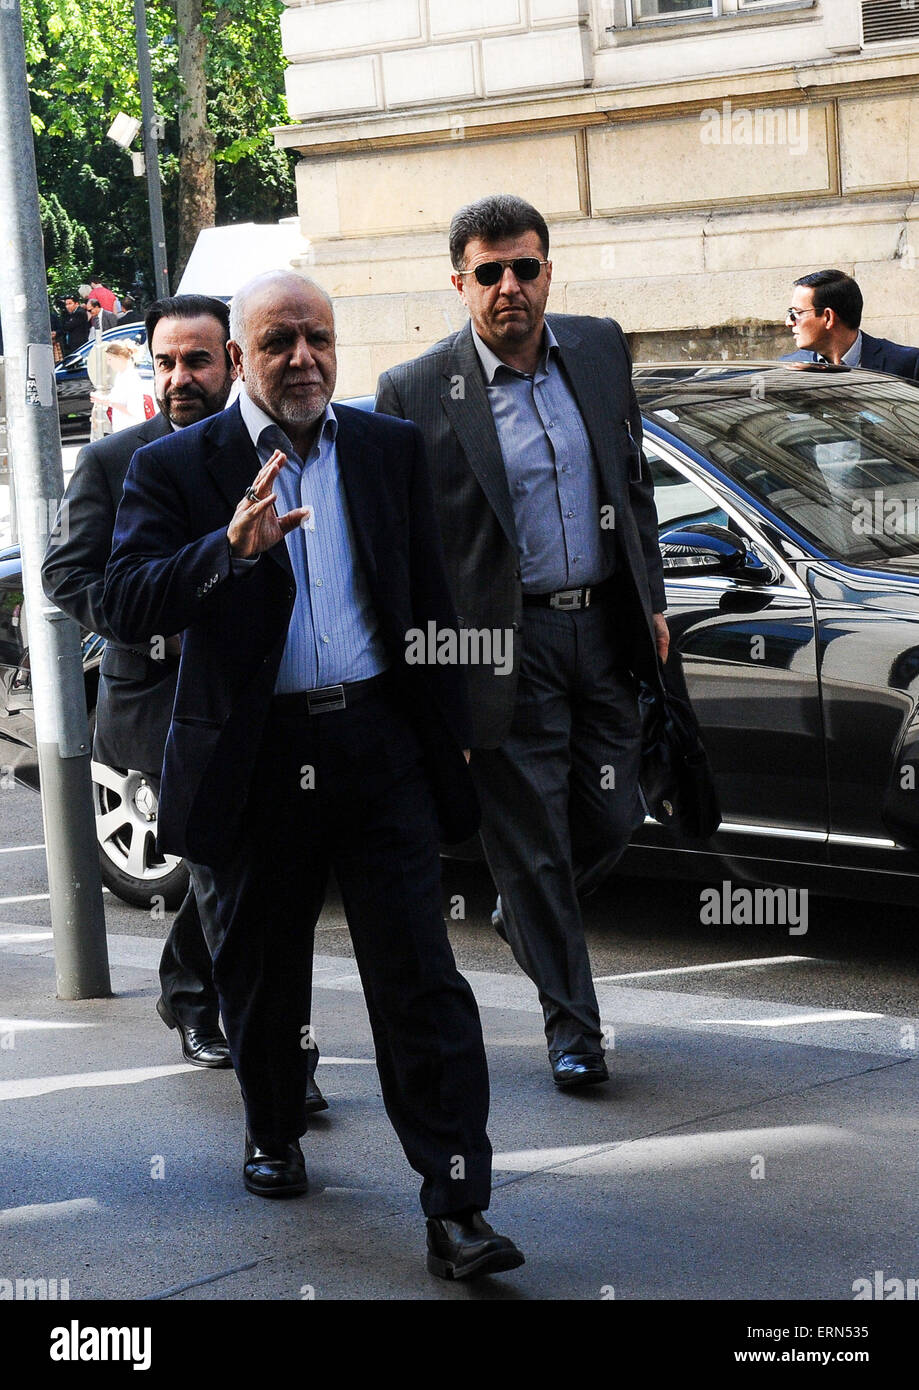 Vienna, Austria. 5th June, 2015. Iran's Minister of Petroleum Bijan Namdar Zangeneh (C) arrives for the 167th Ministerial Meeting of the Organization of the Petroleum Exporting Countries (OPEC) at the headquarters of OPEC in Vienna, Austria, June 5, 2015. Credit:  Qian Yi/Xinhua/Alamy Live News Stock Photo